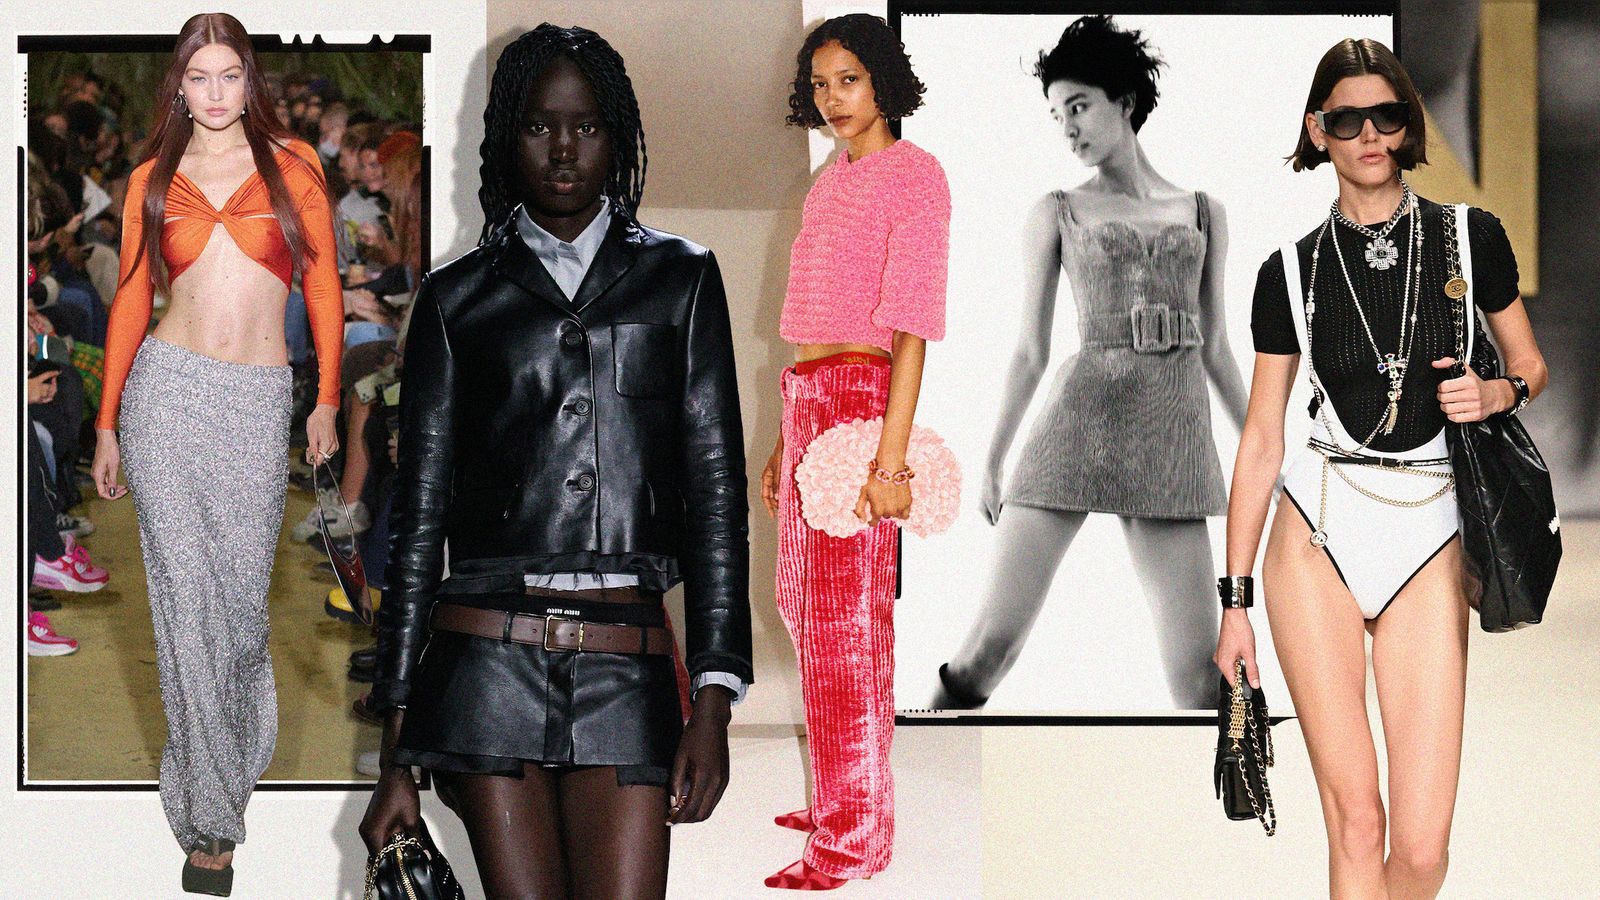 Are Indie Sleaze, Twee, and Tumblr Trends making a comeback?